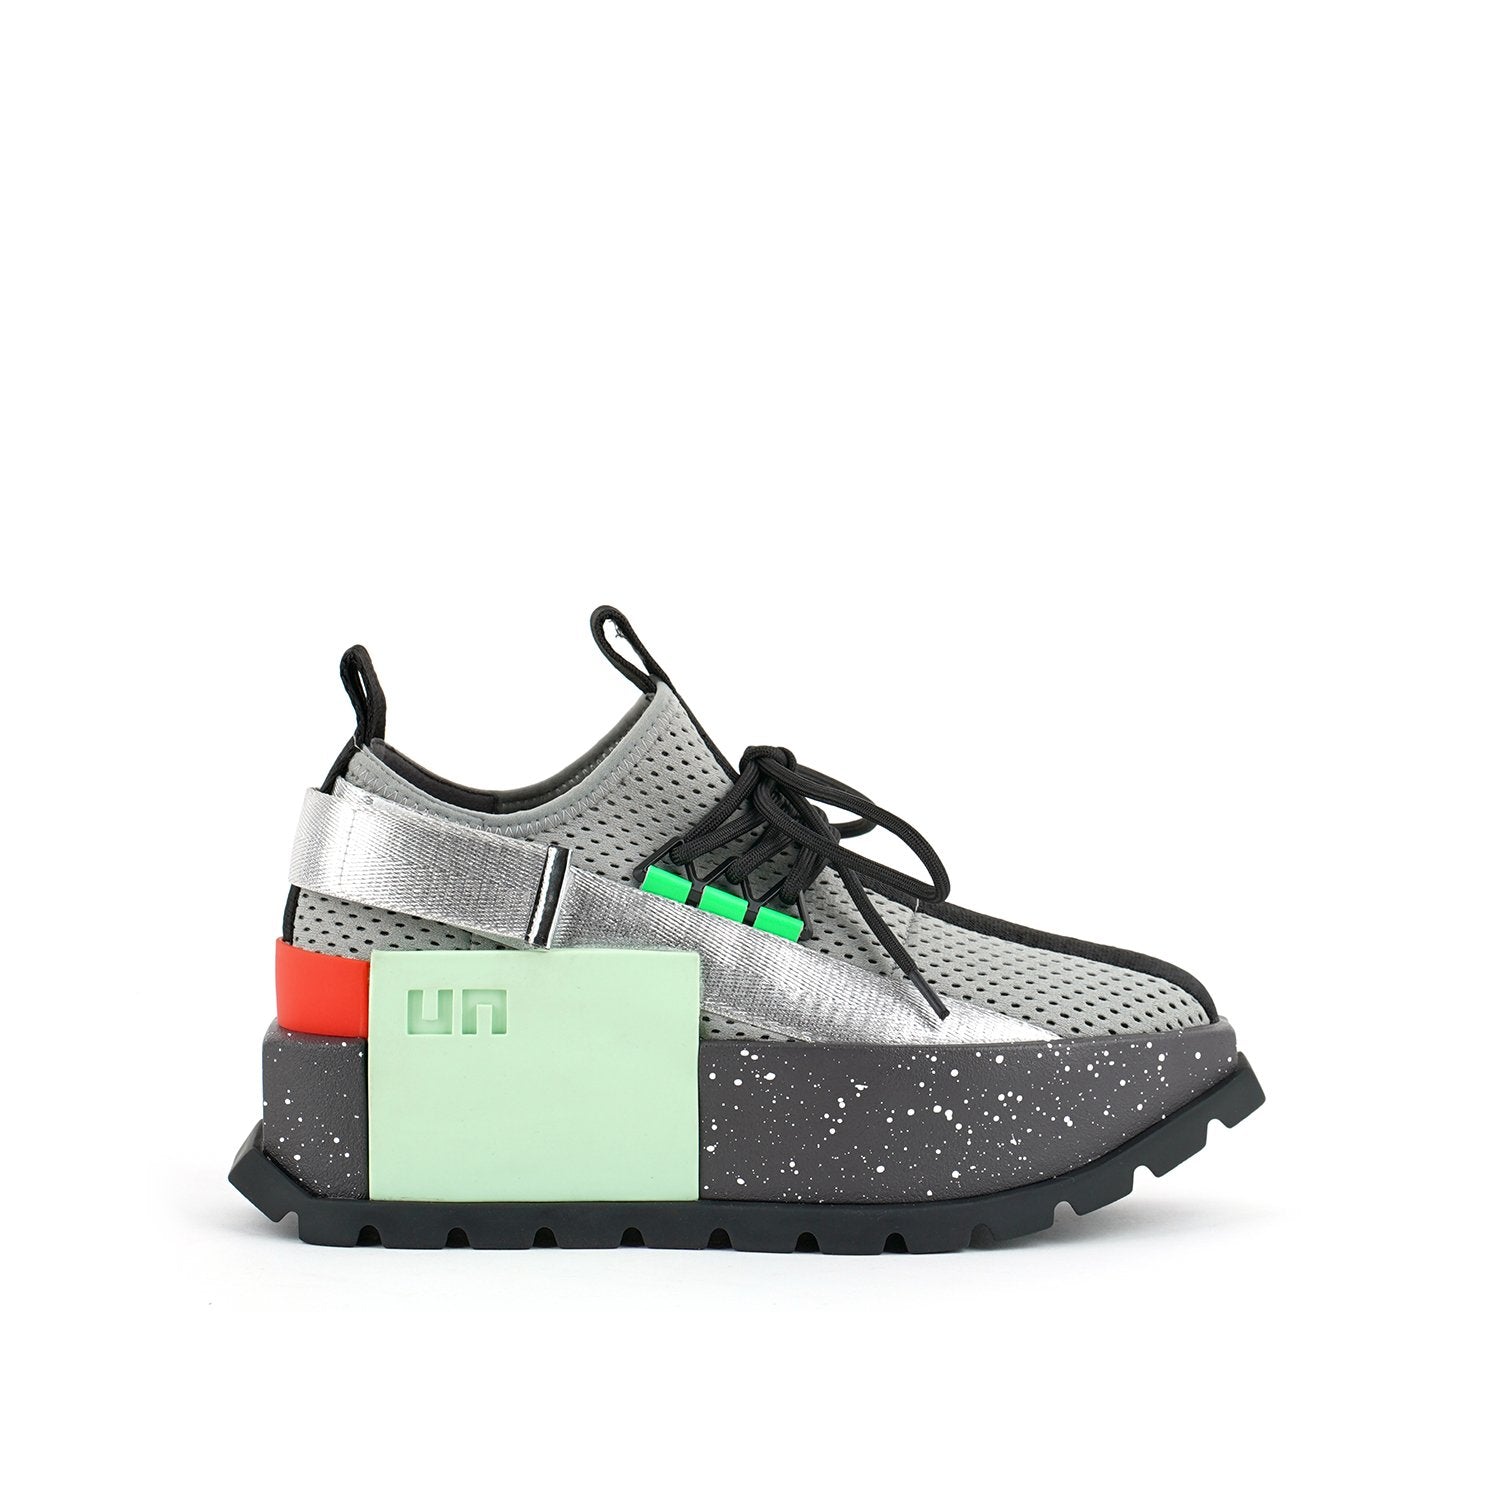 Outer side view of the united nude roko space sneaker. This sneaker sis grey with a platform sole. The upper is a mesh-like fabric. The shoes has a back strap and a lace up front.